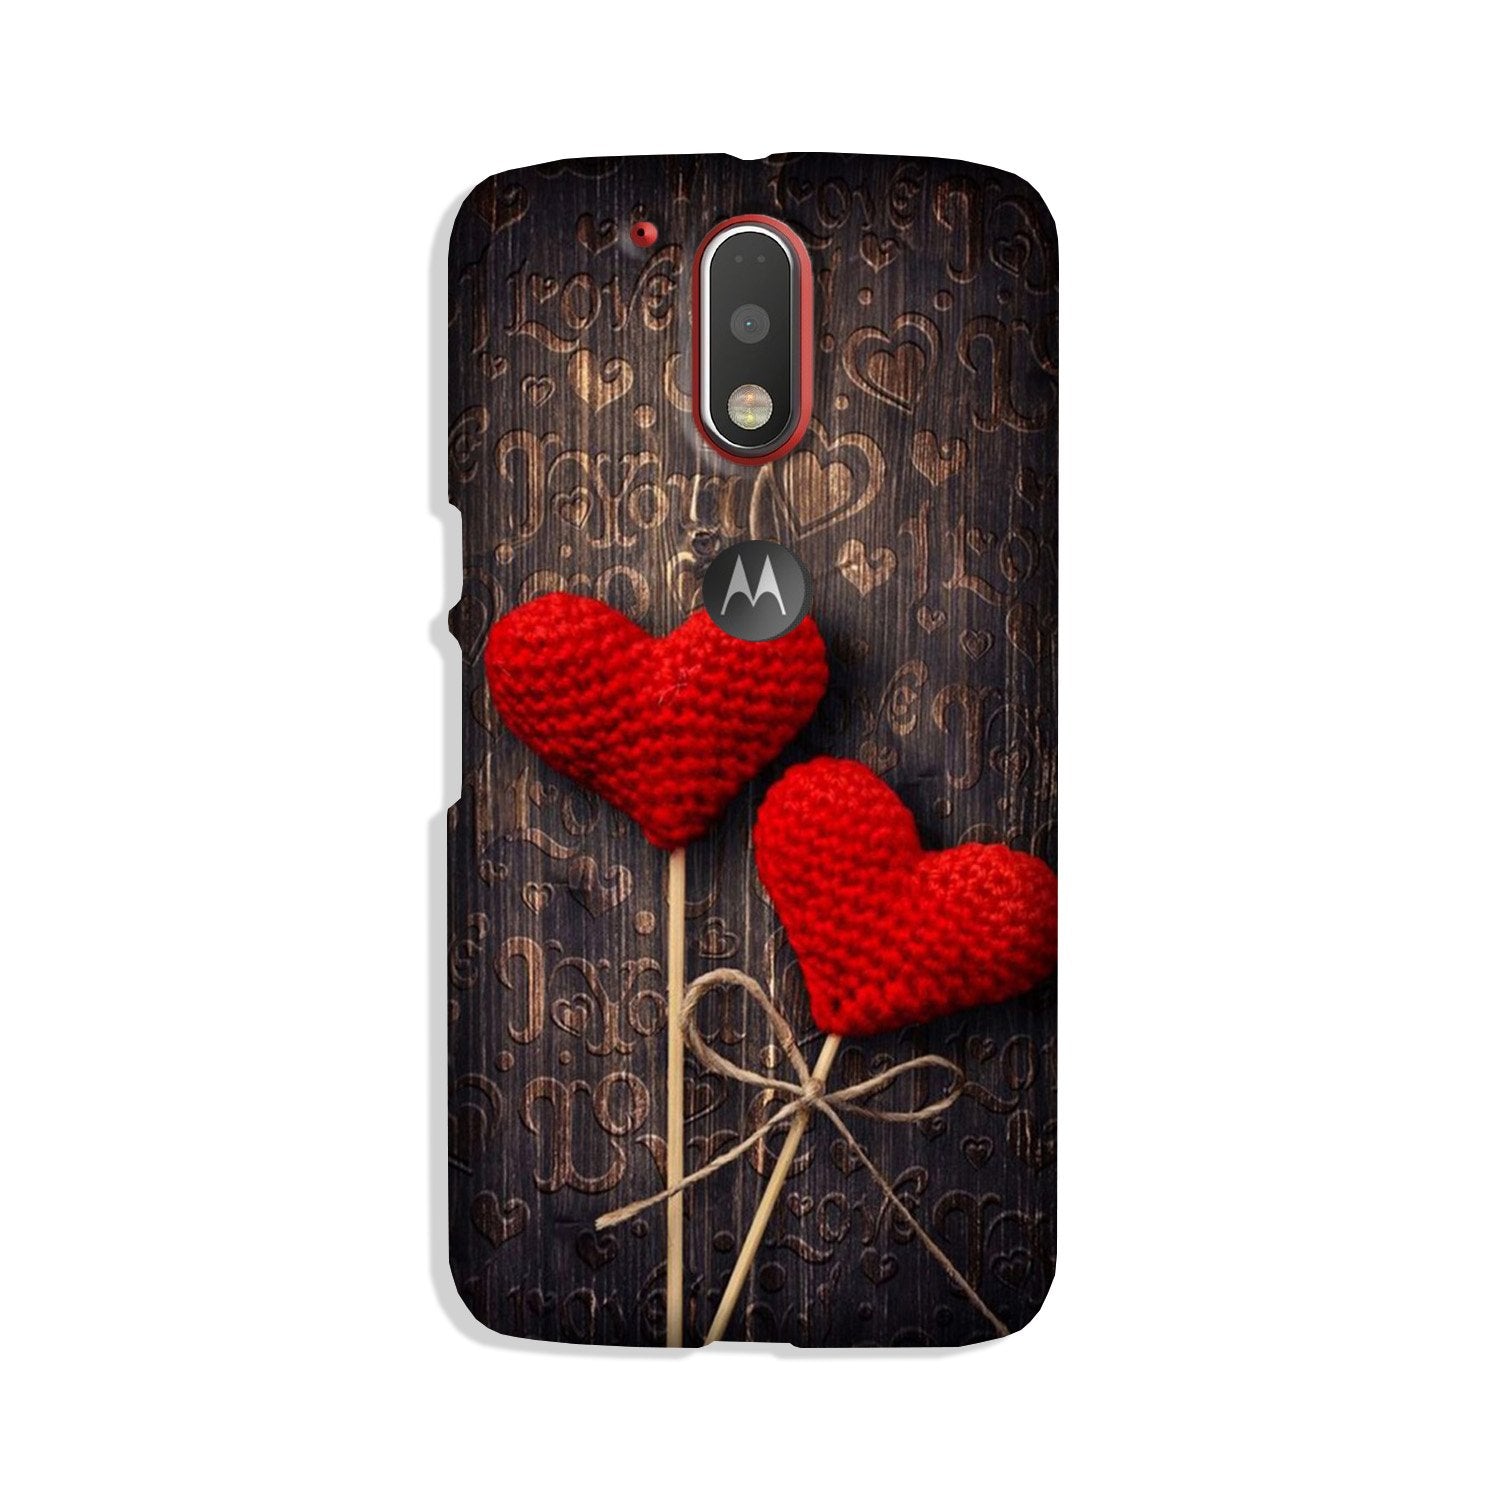 Red Hearts Case for Moto G4 Plus